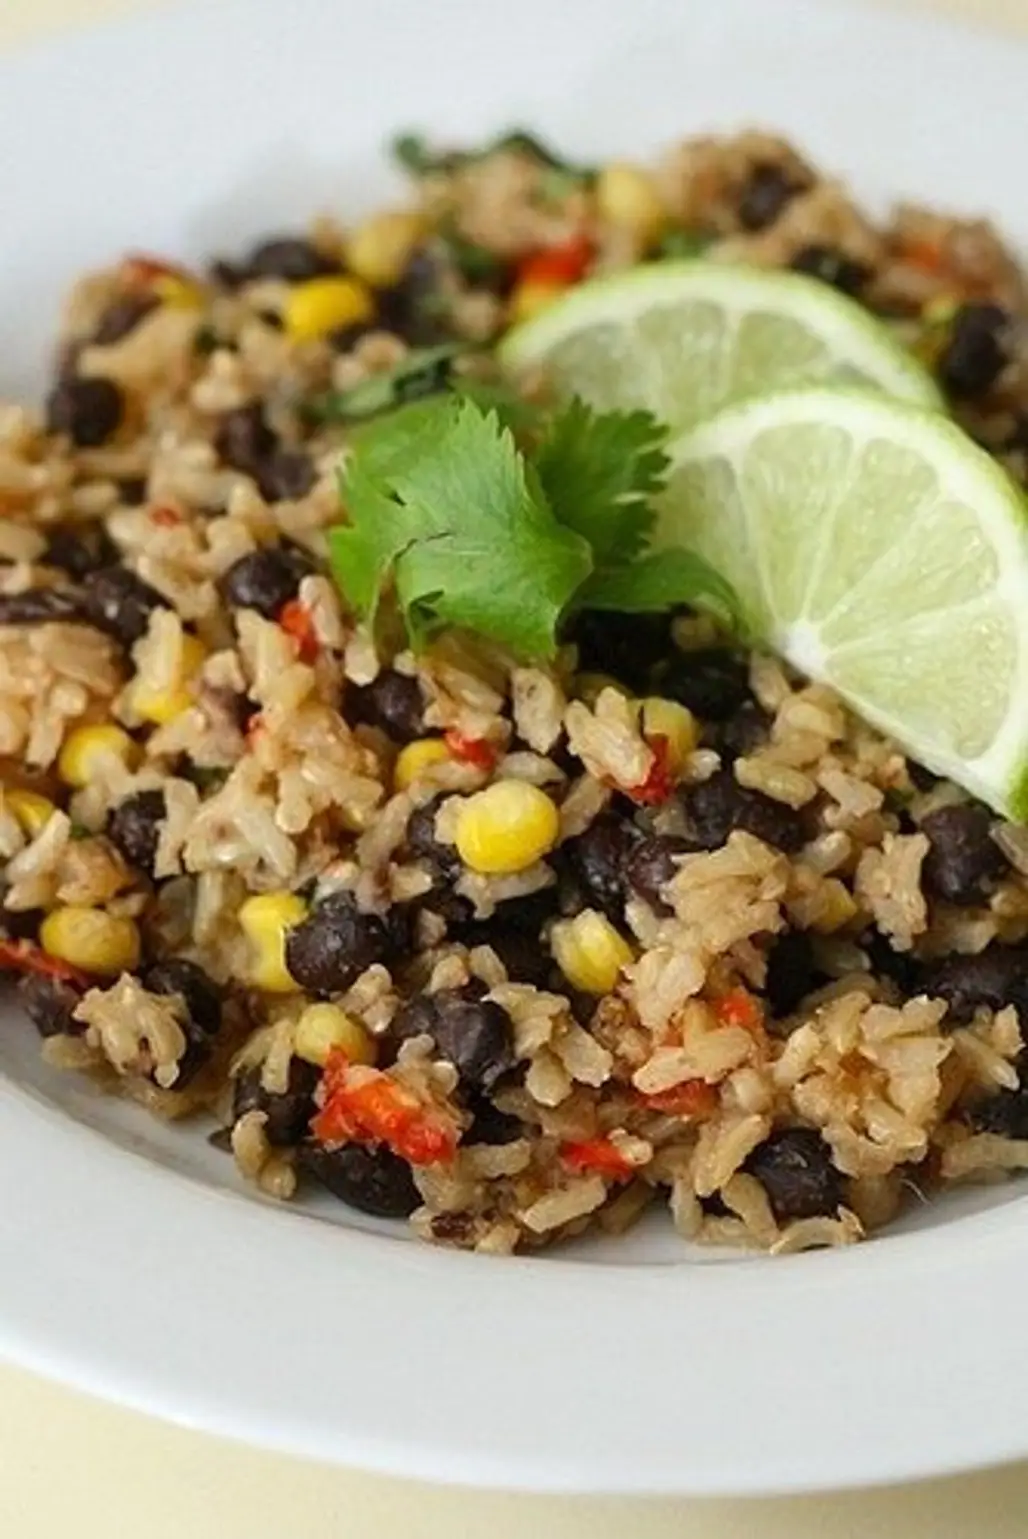 Brown Rice and Beans